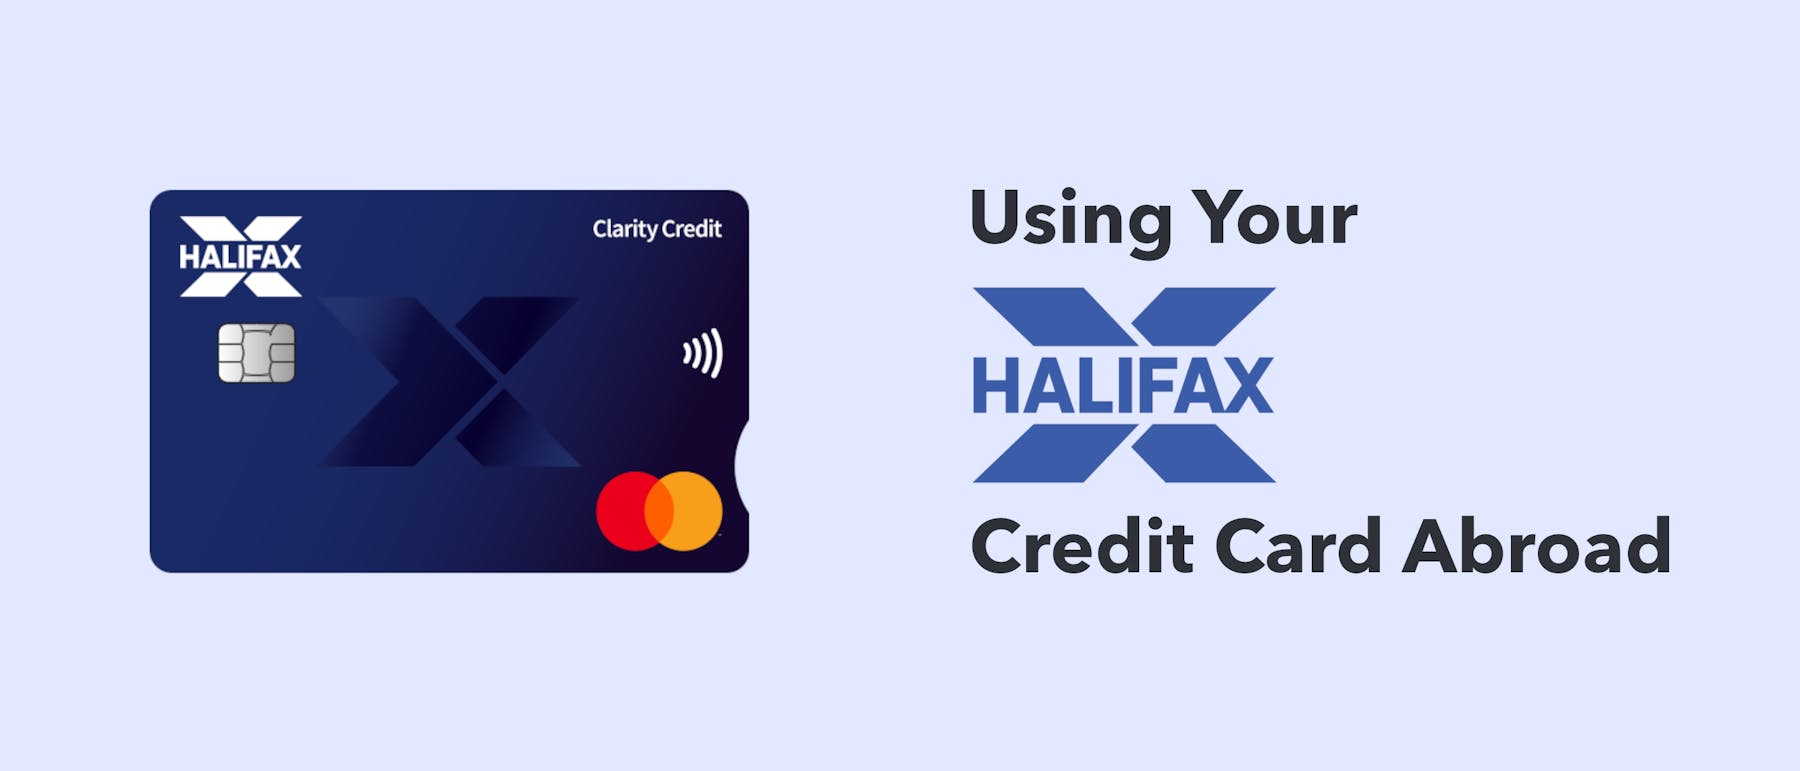 how to activate halifax travel insurance